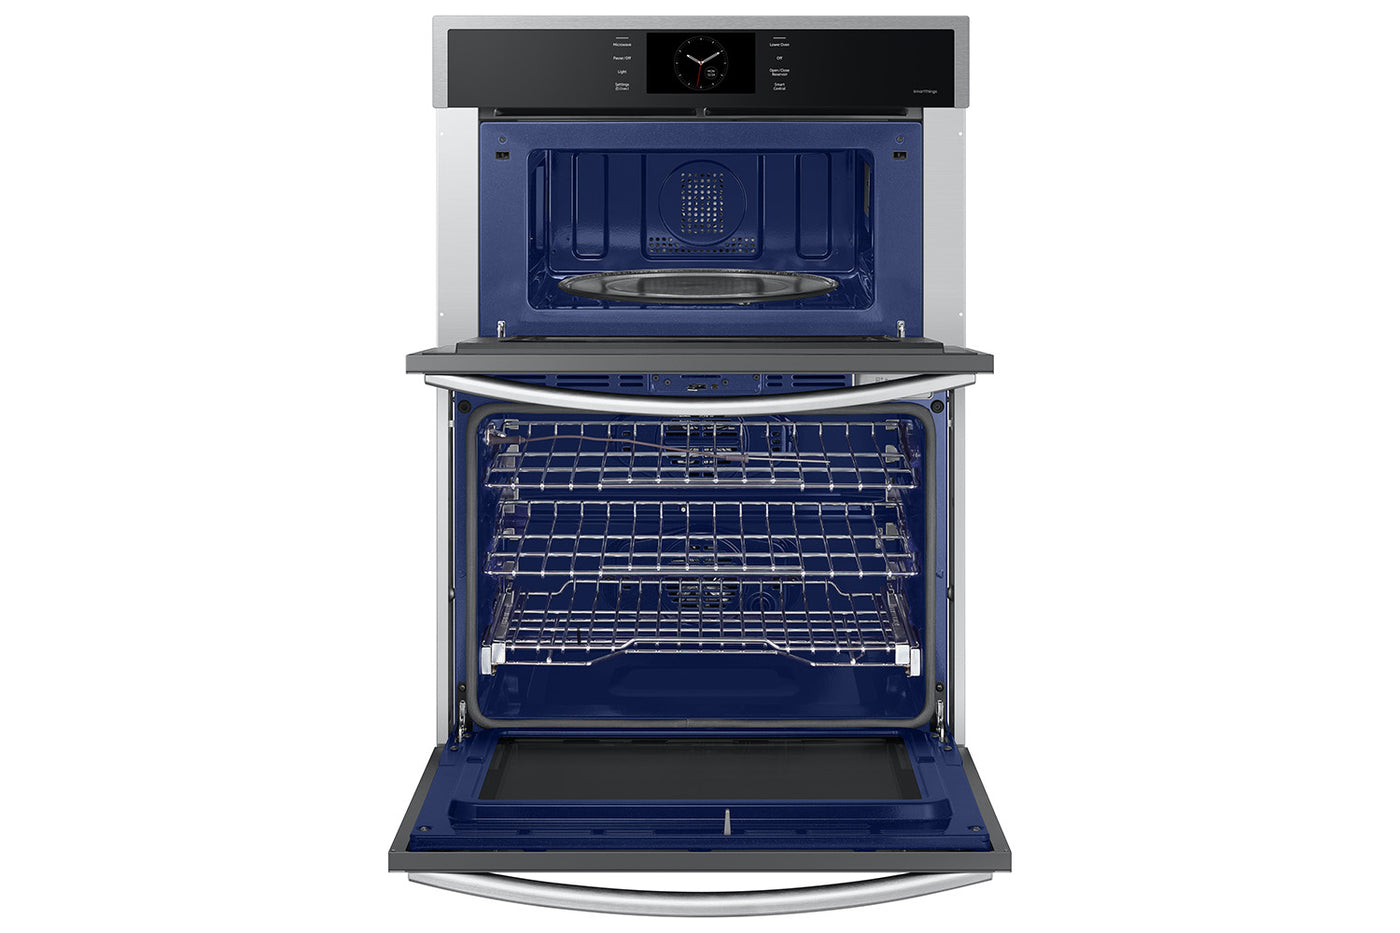 Samsung Stainless Steel Combination Wall Oven with Air Fry and Air Sous Vide (7.0 cu.ft.) - NQ70CG600DSRAA